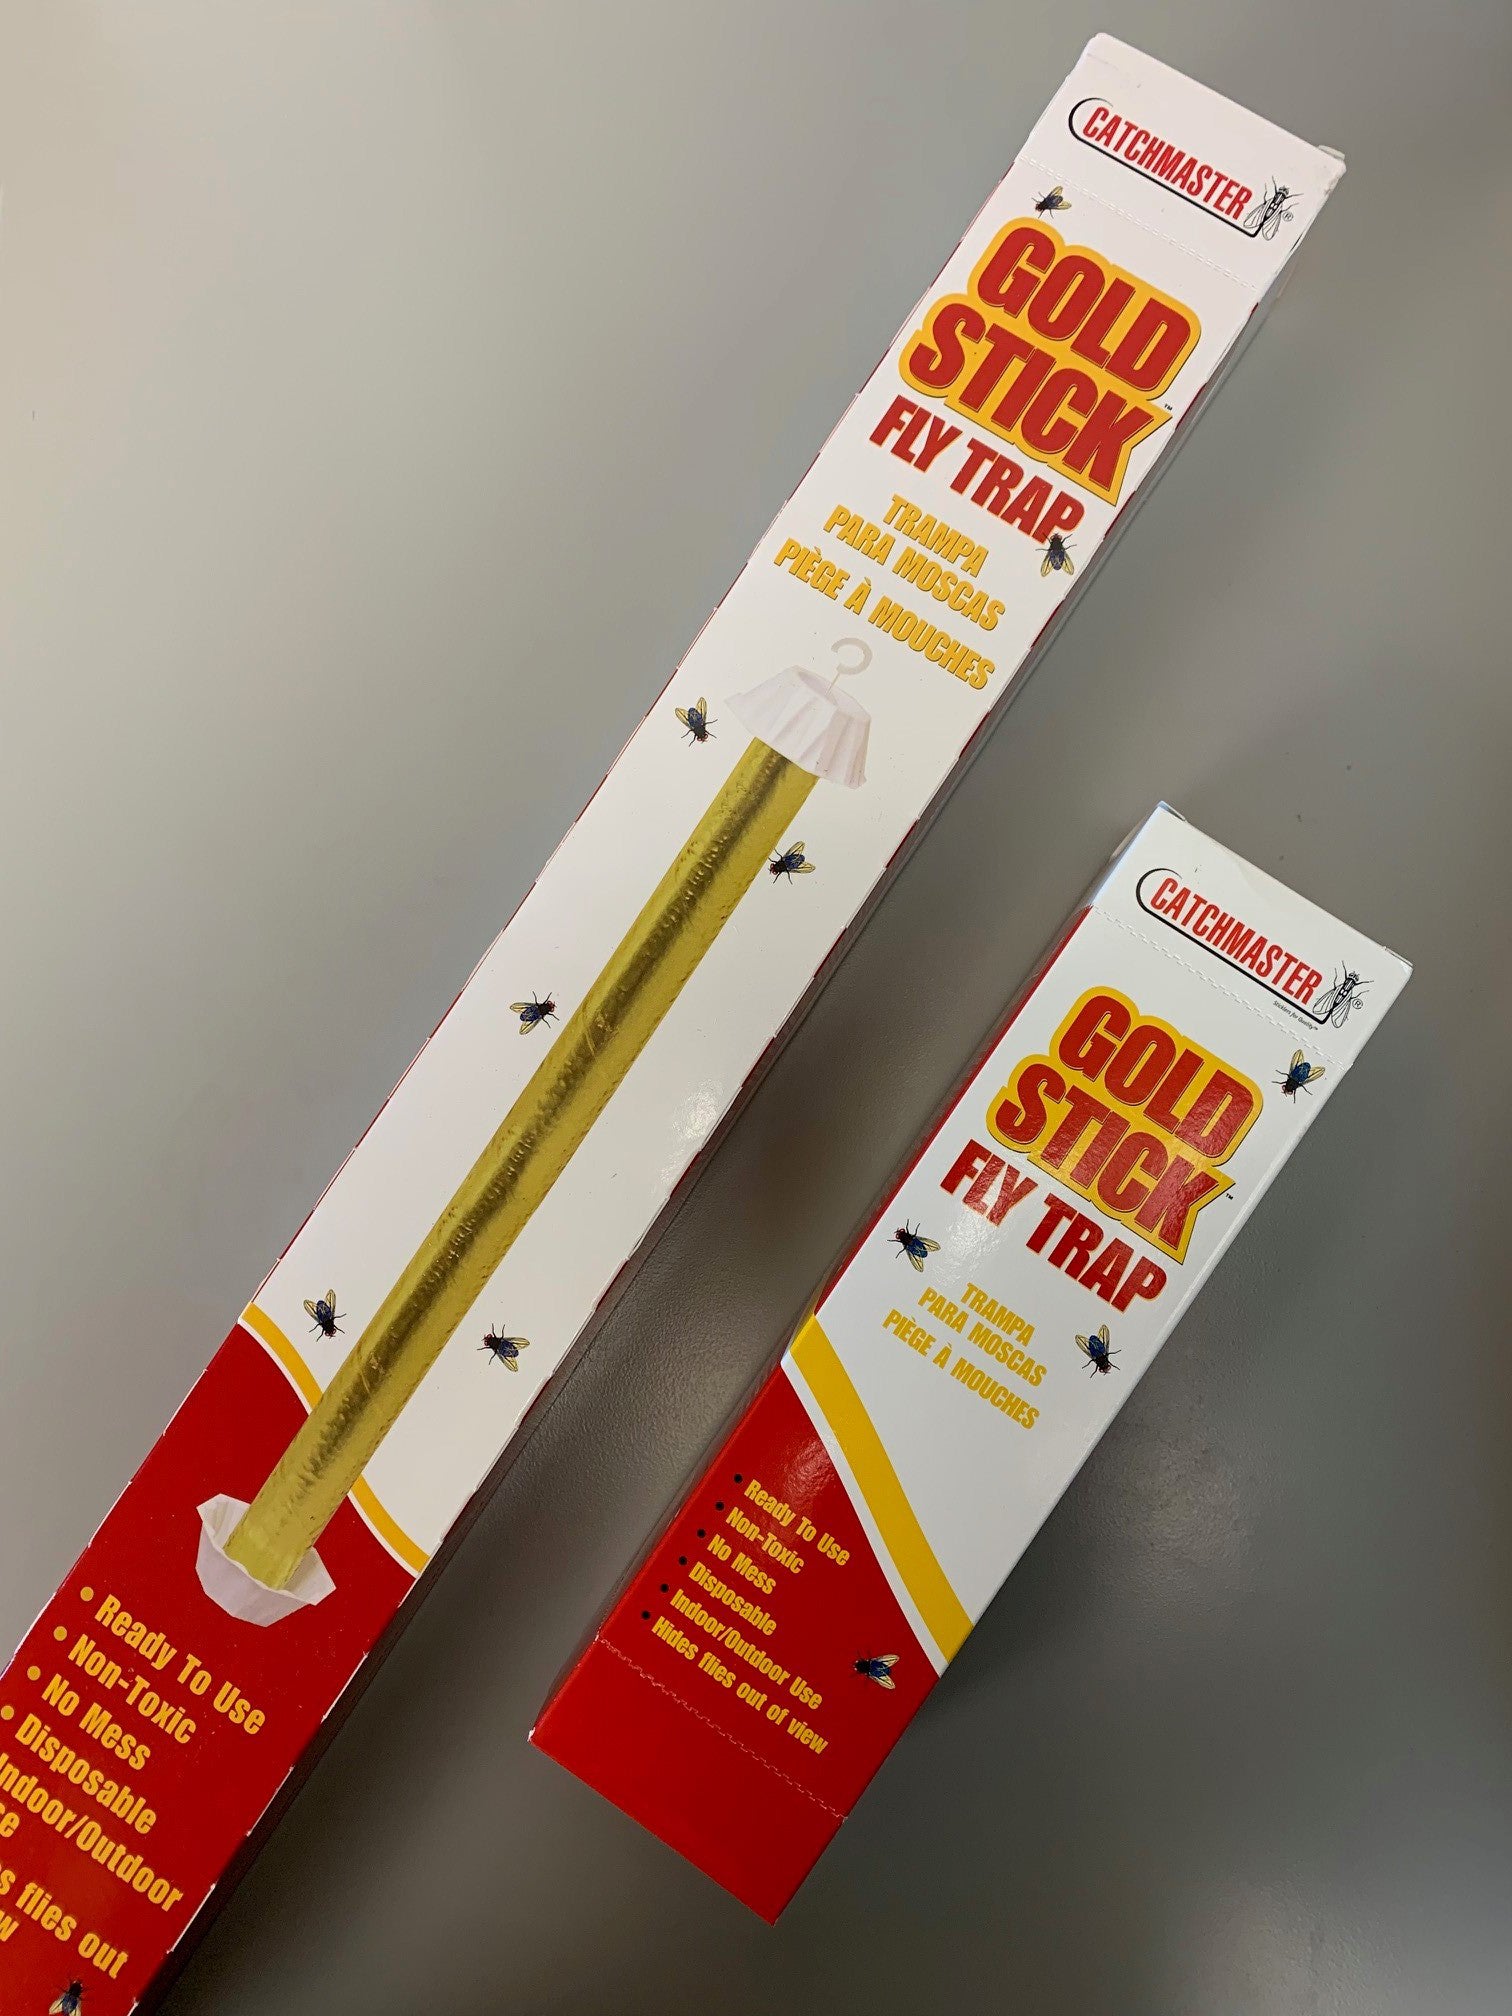 Small Gold Stick Fly Trap by Catchmaster – Speed Exterminating